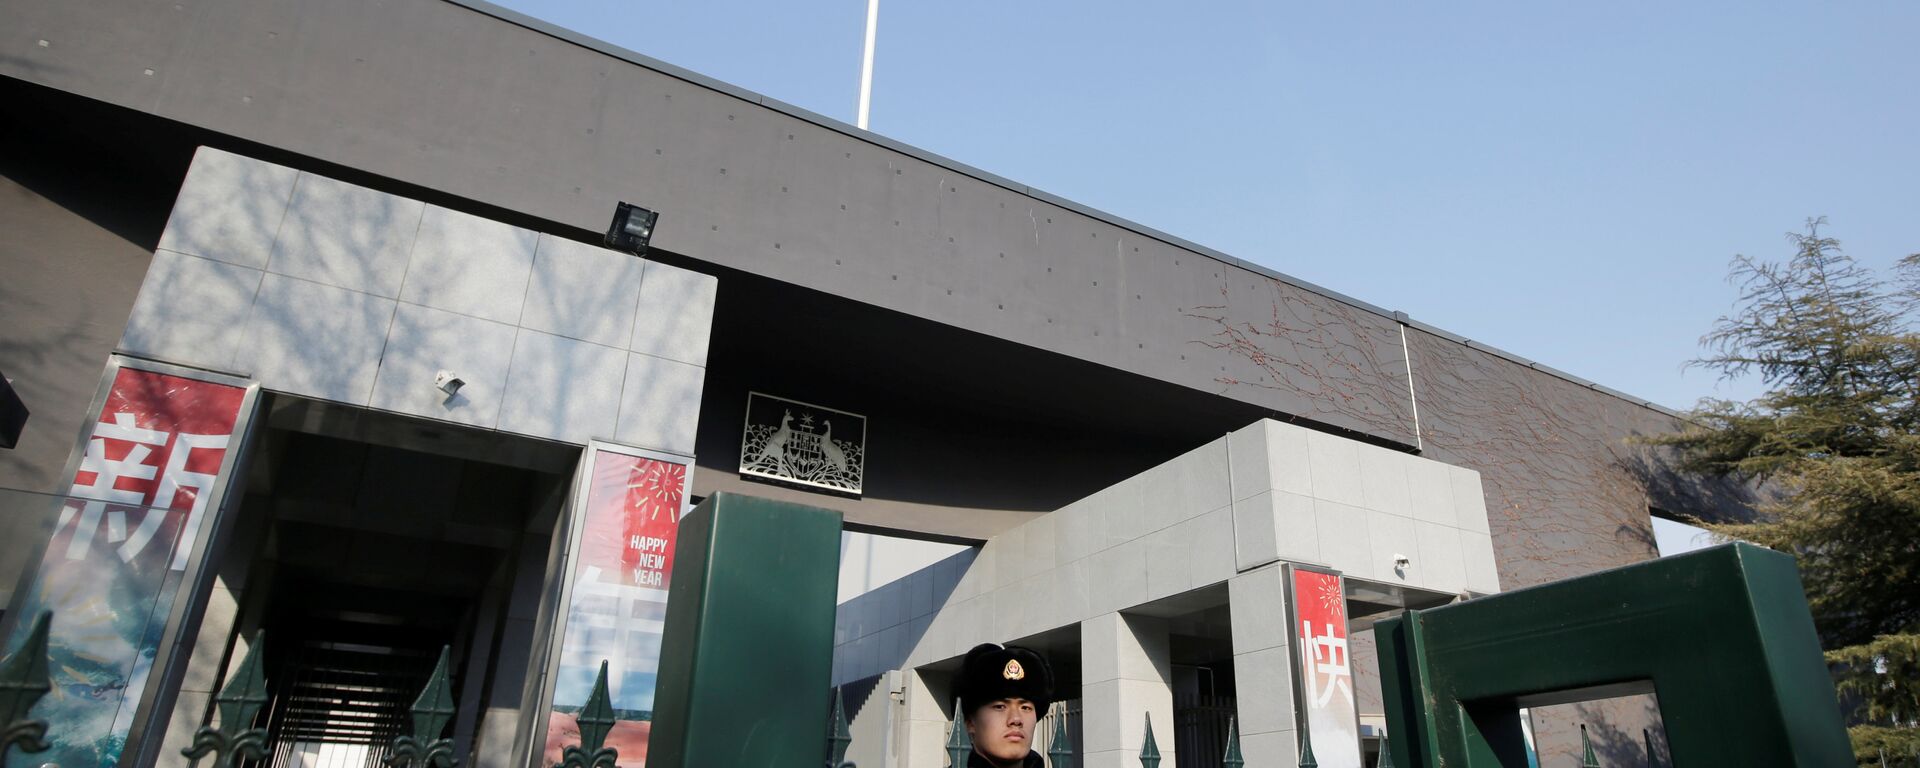 A paramilitary policeman stands guard at the Australian embassy in Beijing, China January 24, 2019. - 俄罗斯卫星通讯社, 1920, 24.01.2019